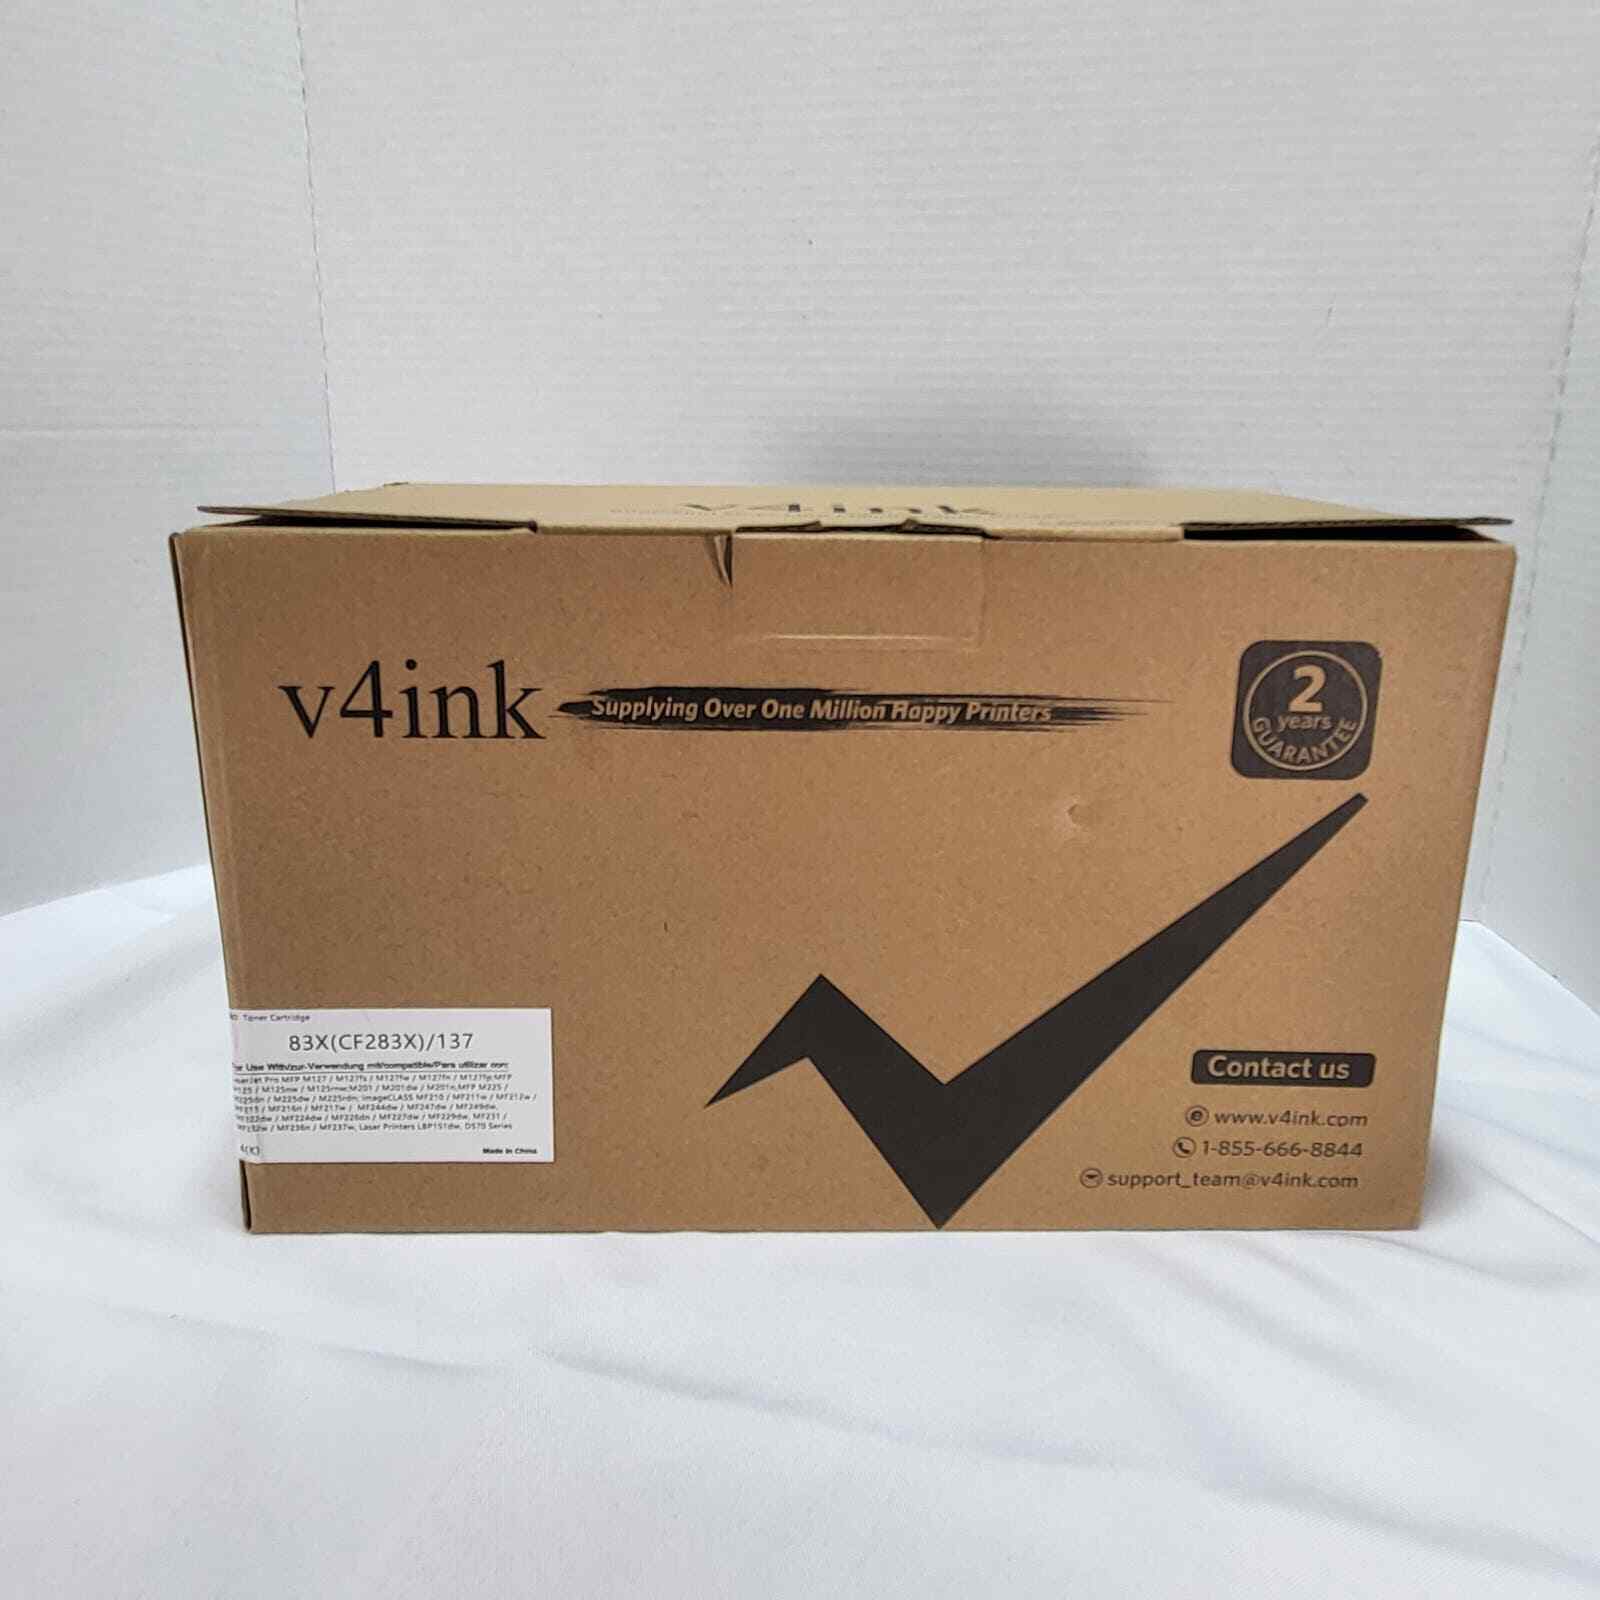 New V4ink 83X (CF283X)/137 Replacement Toner Cartridge Four 4 Pack